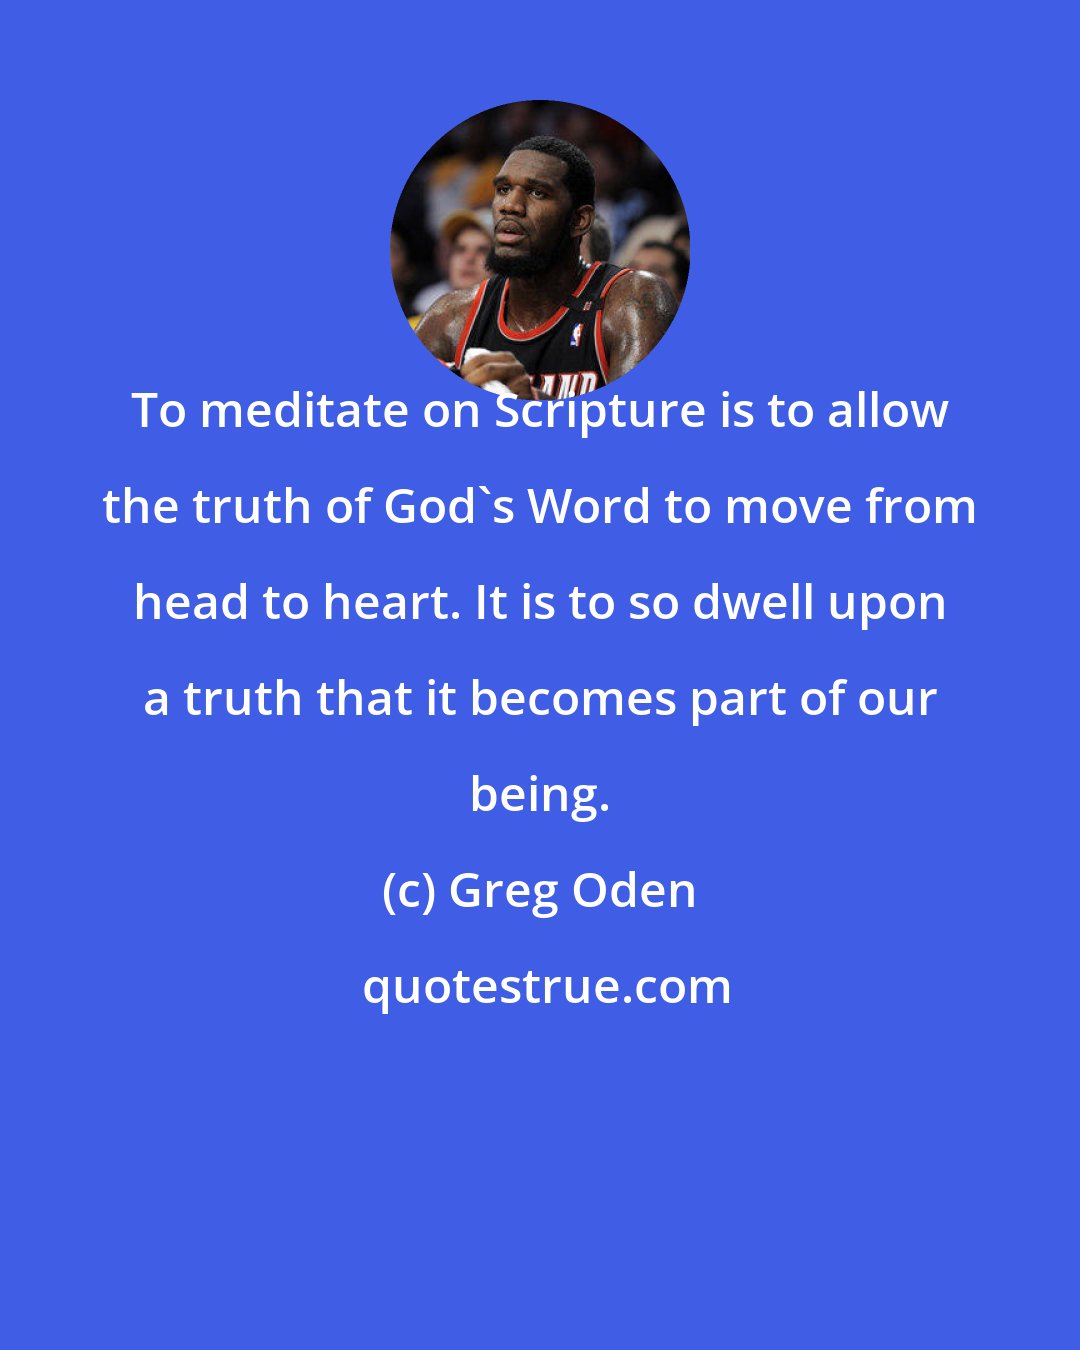 Greg Oden: To meditate on Scripture is to allow the truth of God's Word to move from head to heart. It is to so dwell upon a truth that it becomes part of our being.